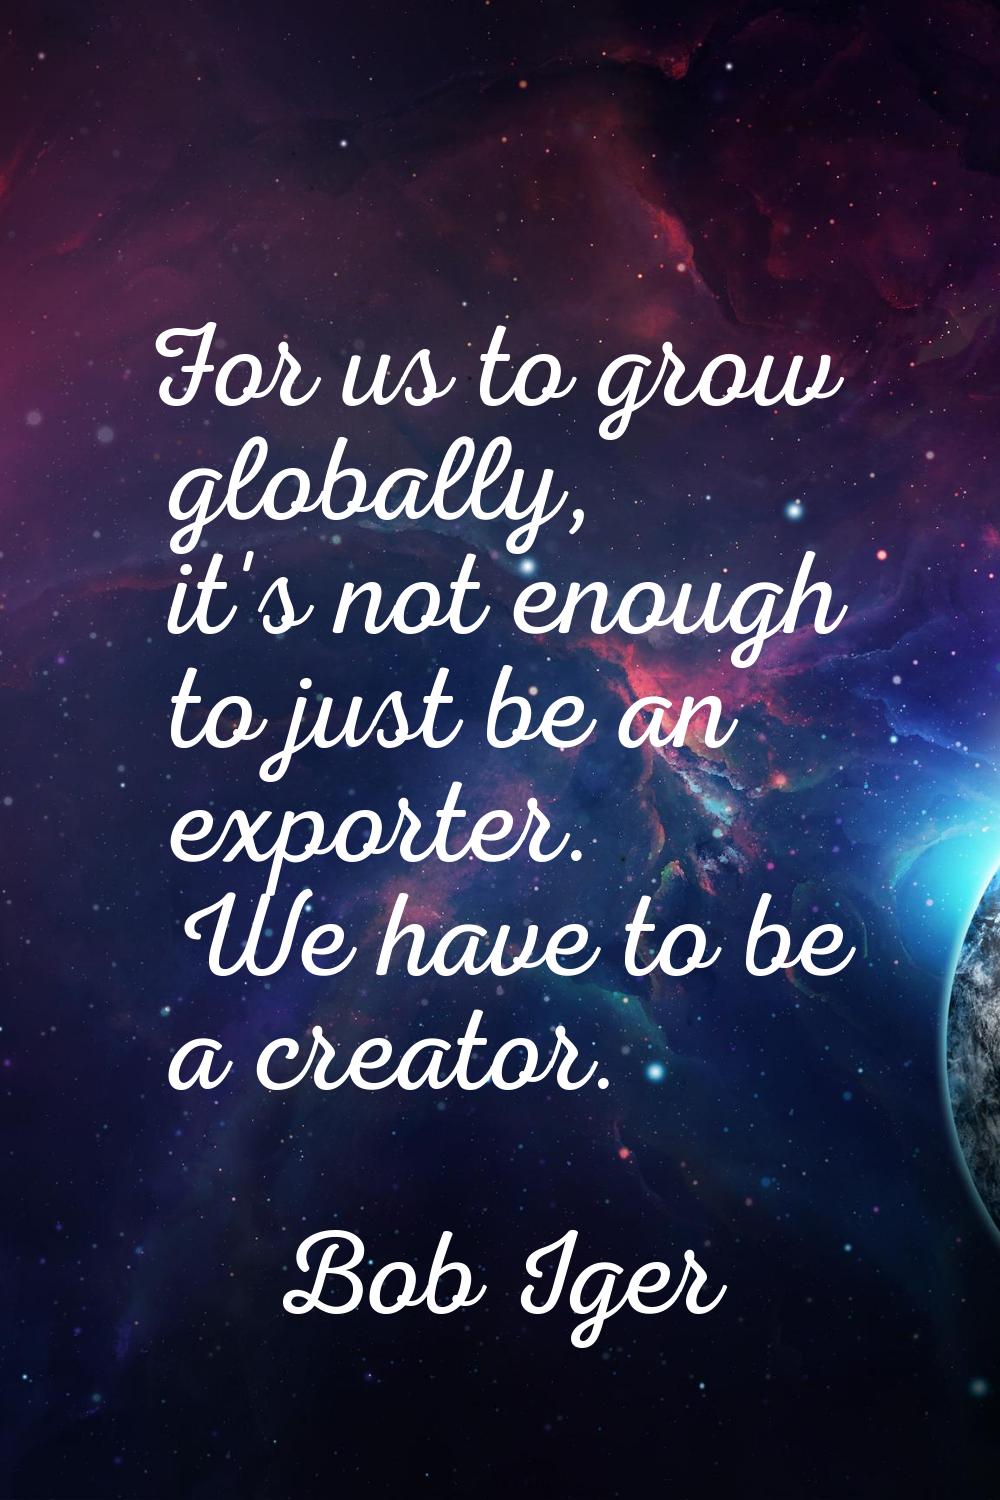 For us to grow globally, it's not enough to just be an exporter. We have to be a creator.